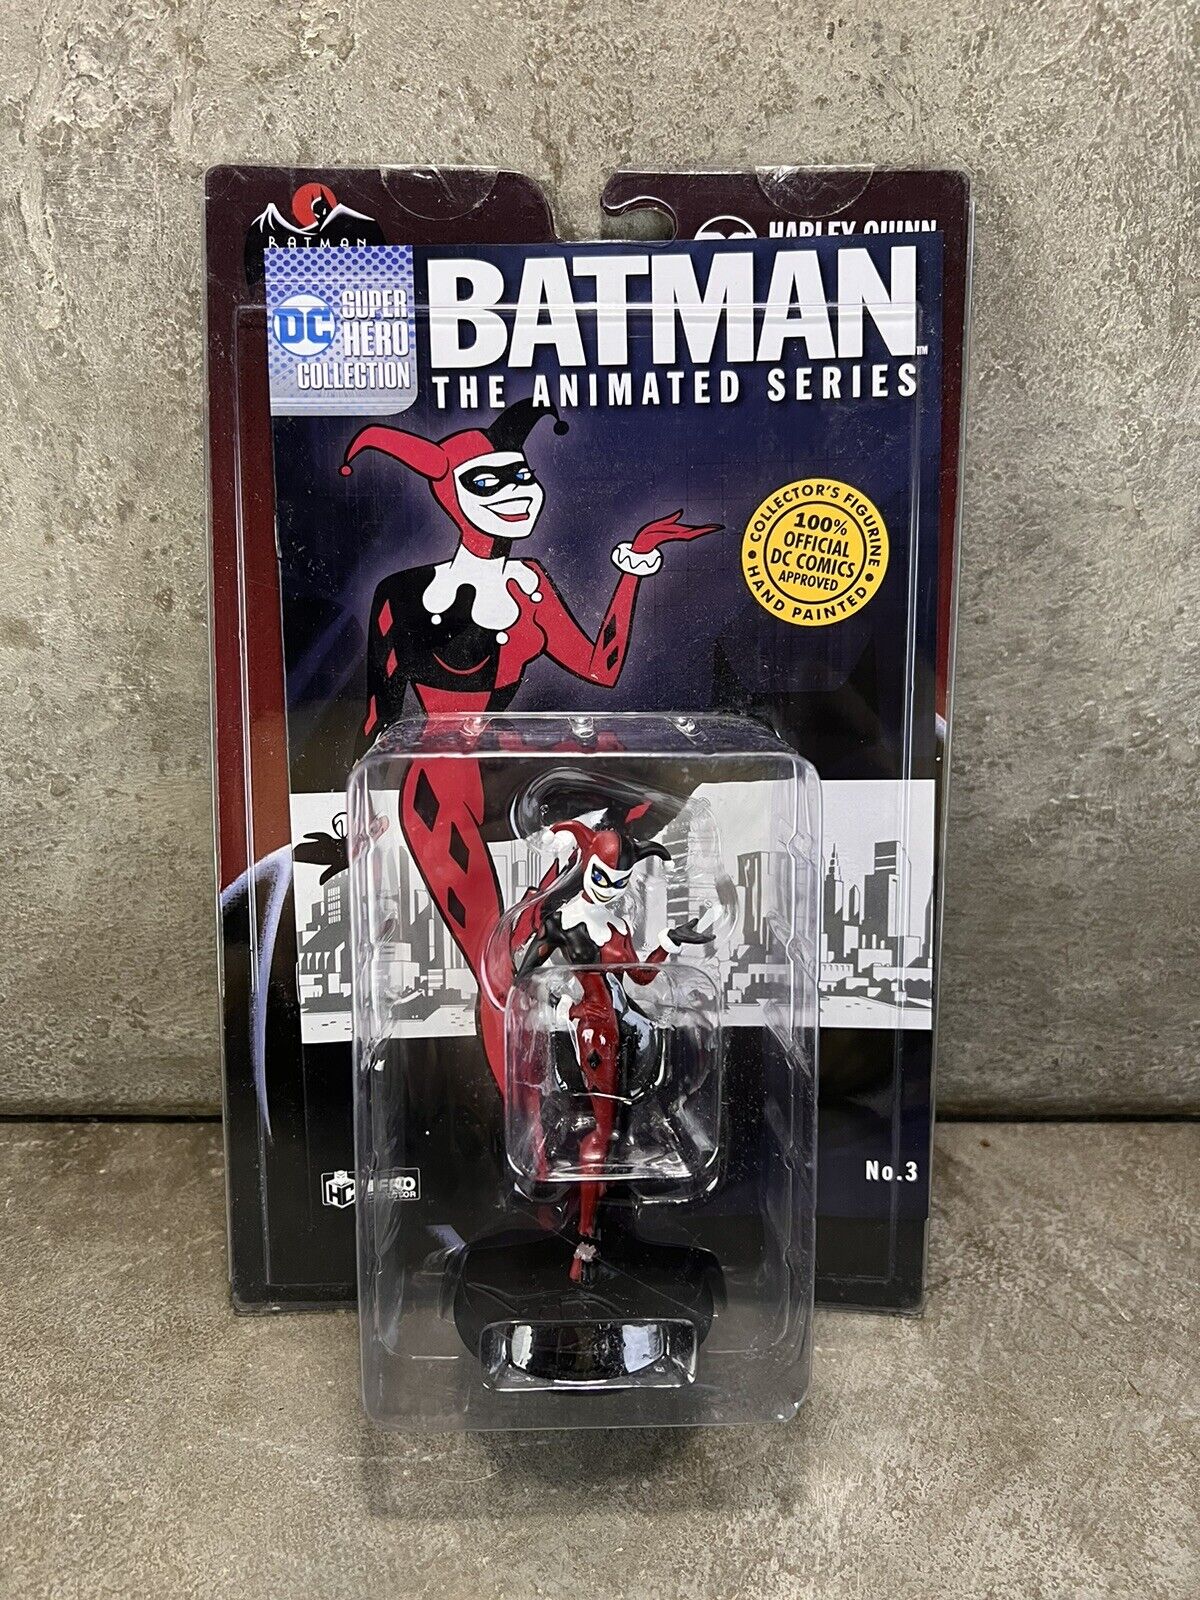 Batman: The Animated Series Figurine Collection Series 1 #3 Harley Quinn.